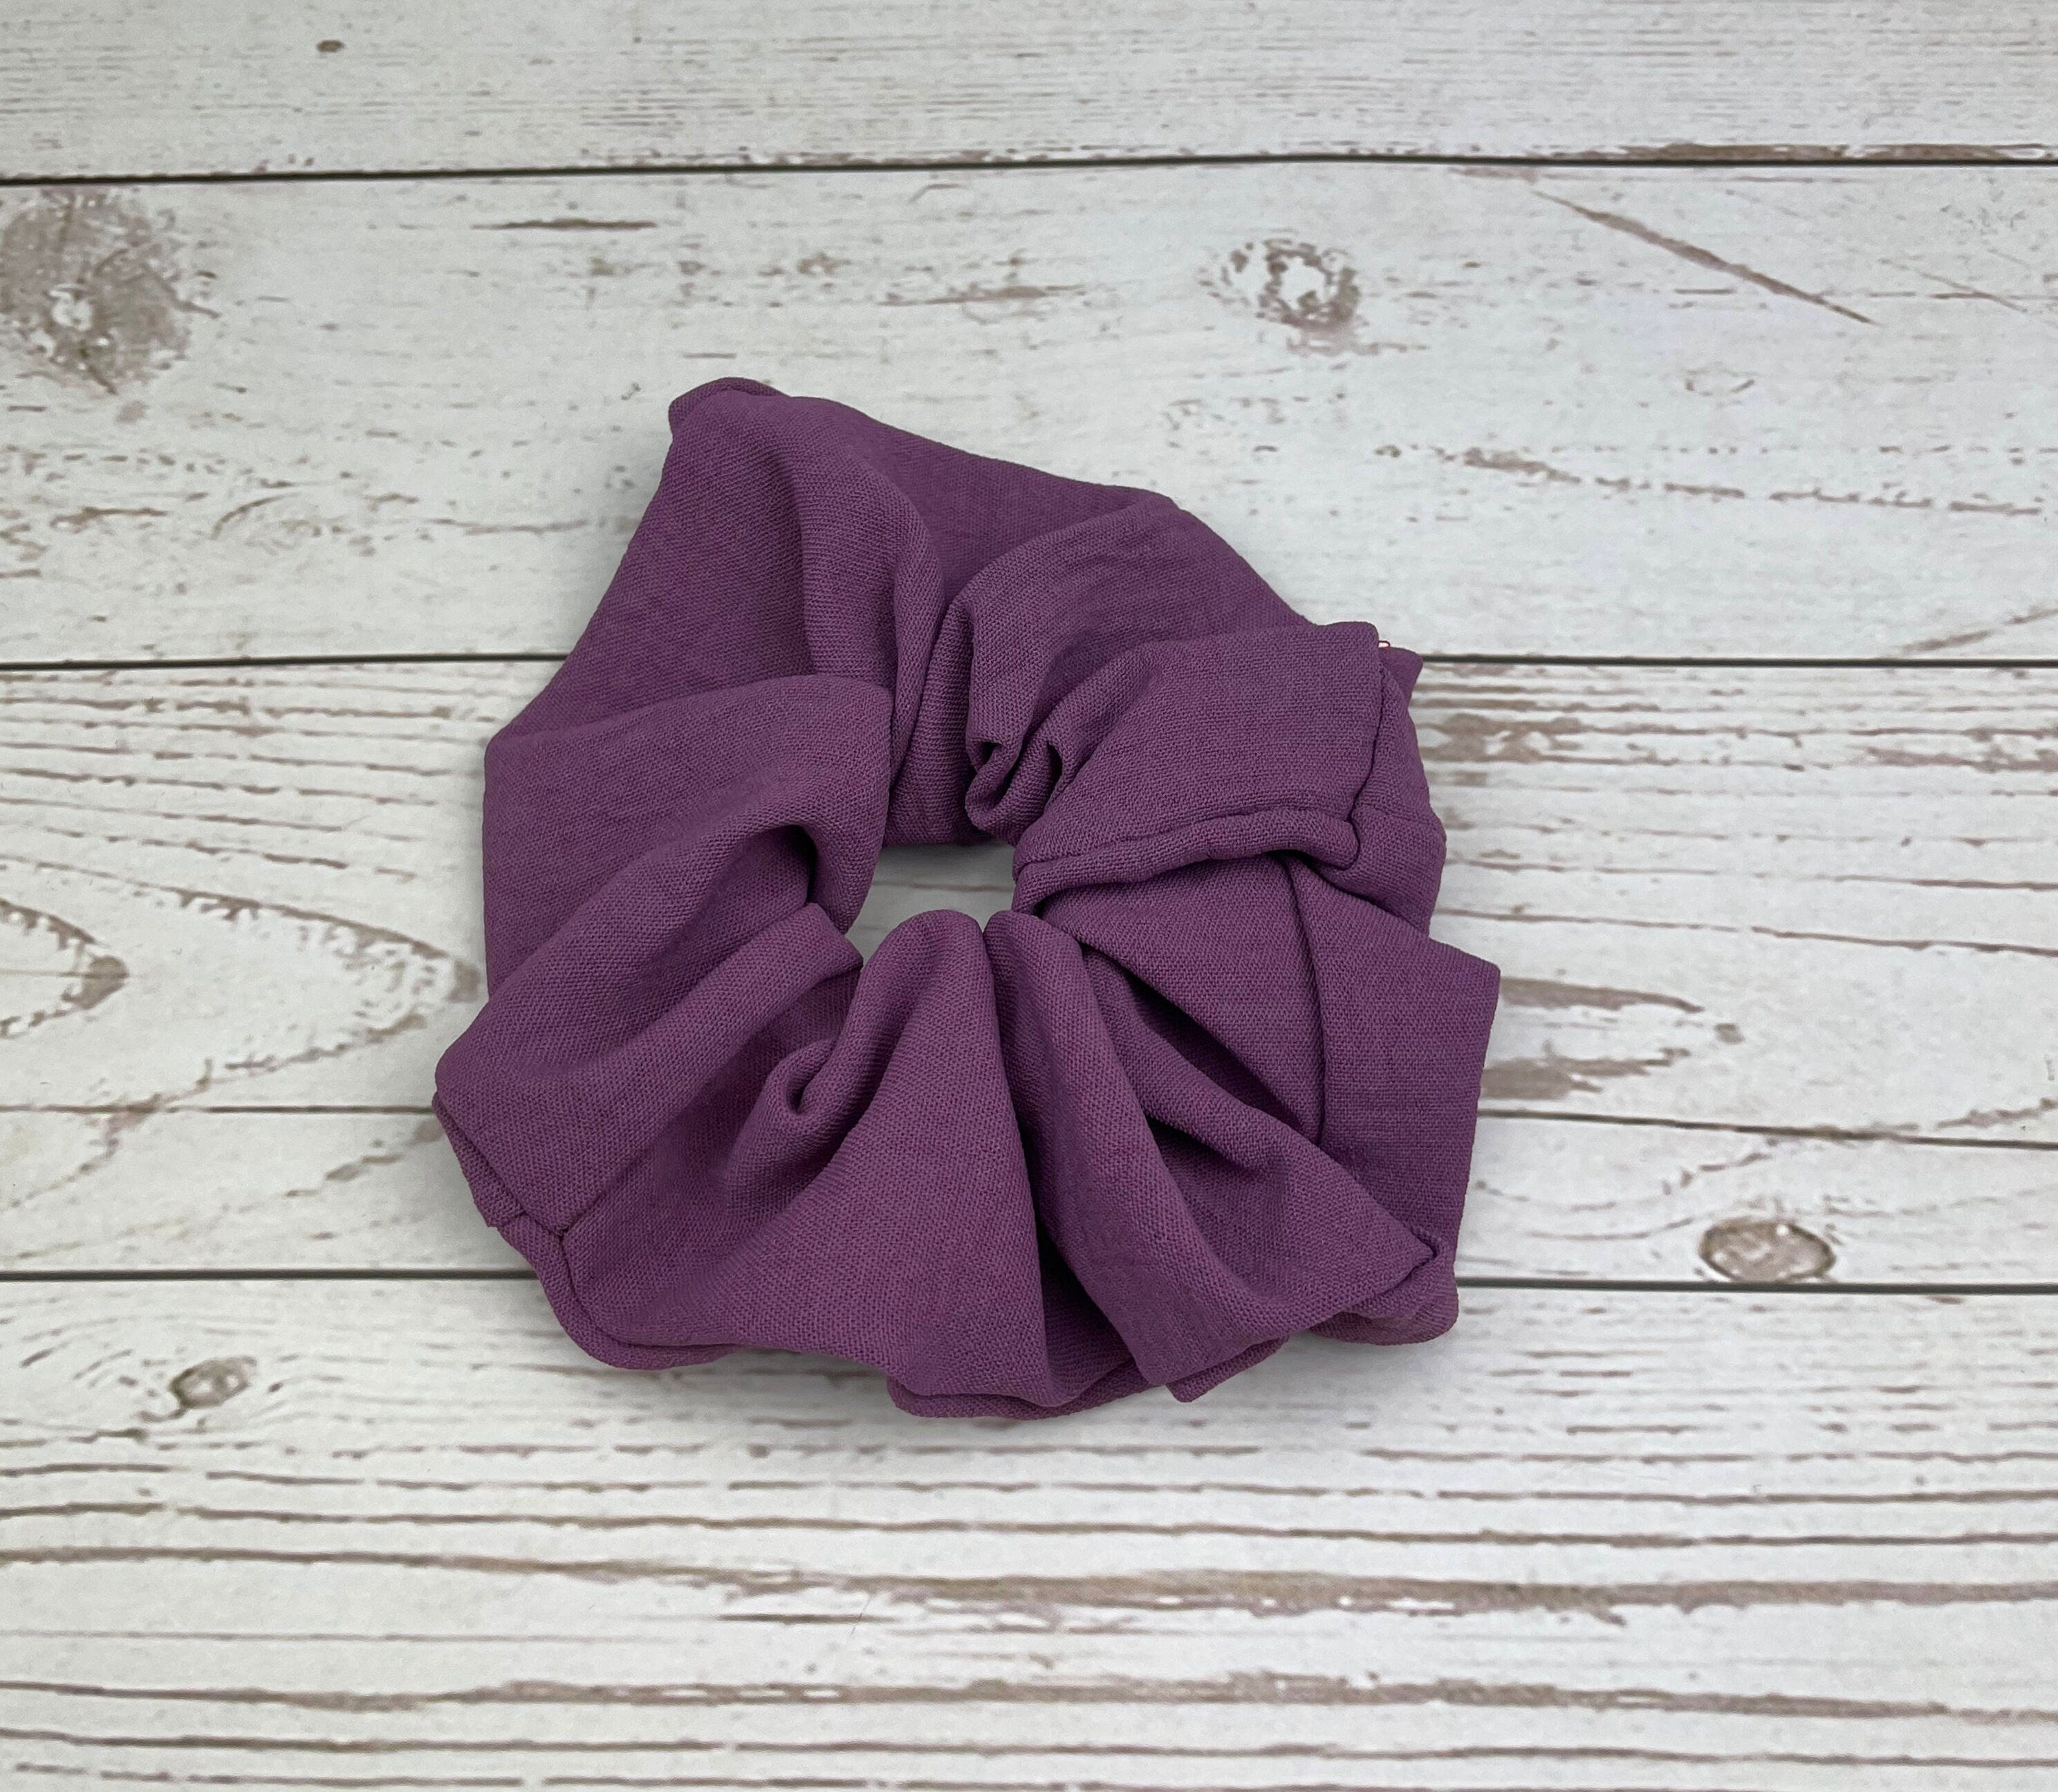 Handmade Satin Scrunchie with Bow - Colorful Pattern Hair Accessory in Green, Lilac, Red, Beige and Orange - Hair Ties and Scrunchies